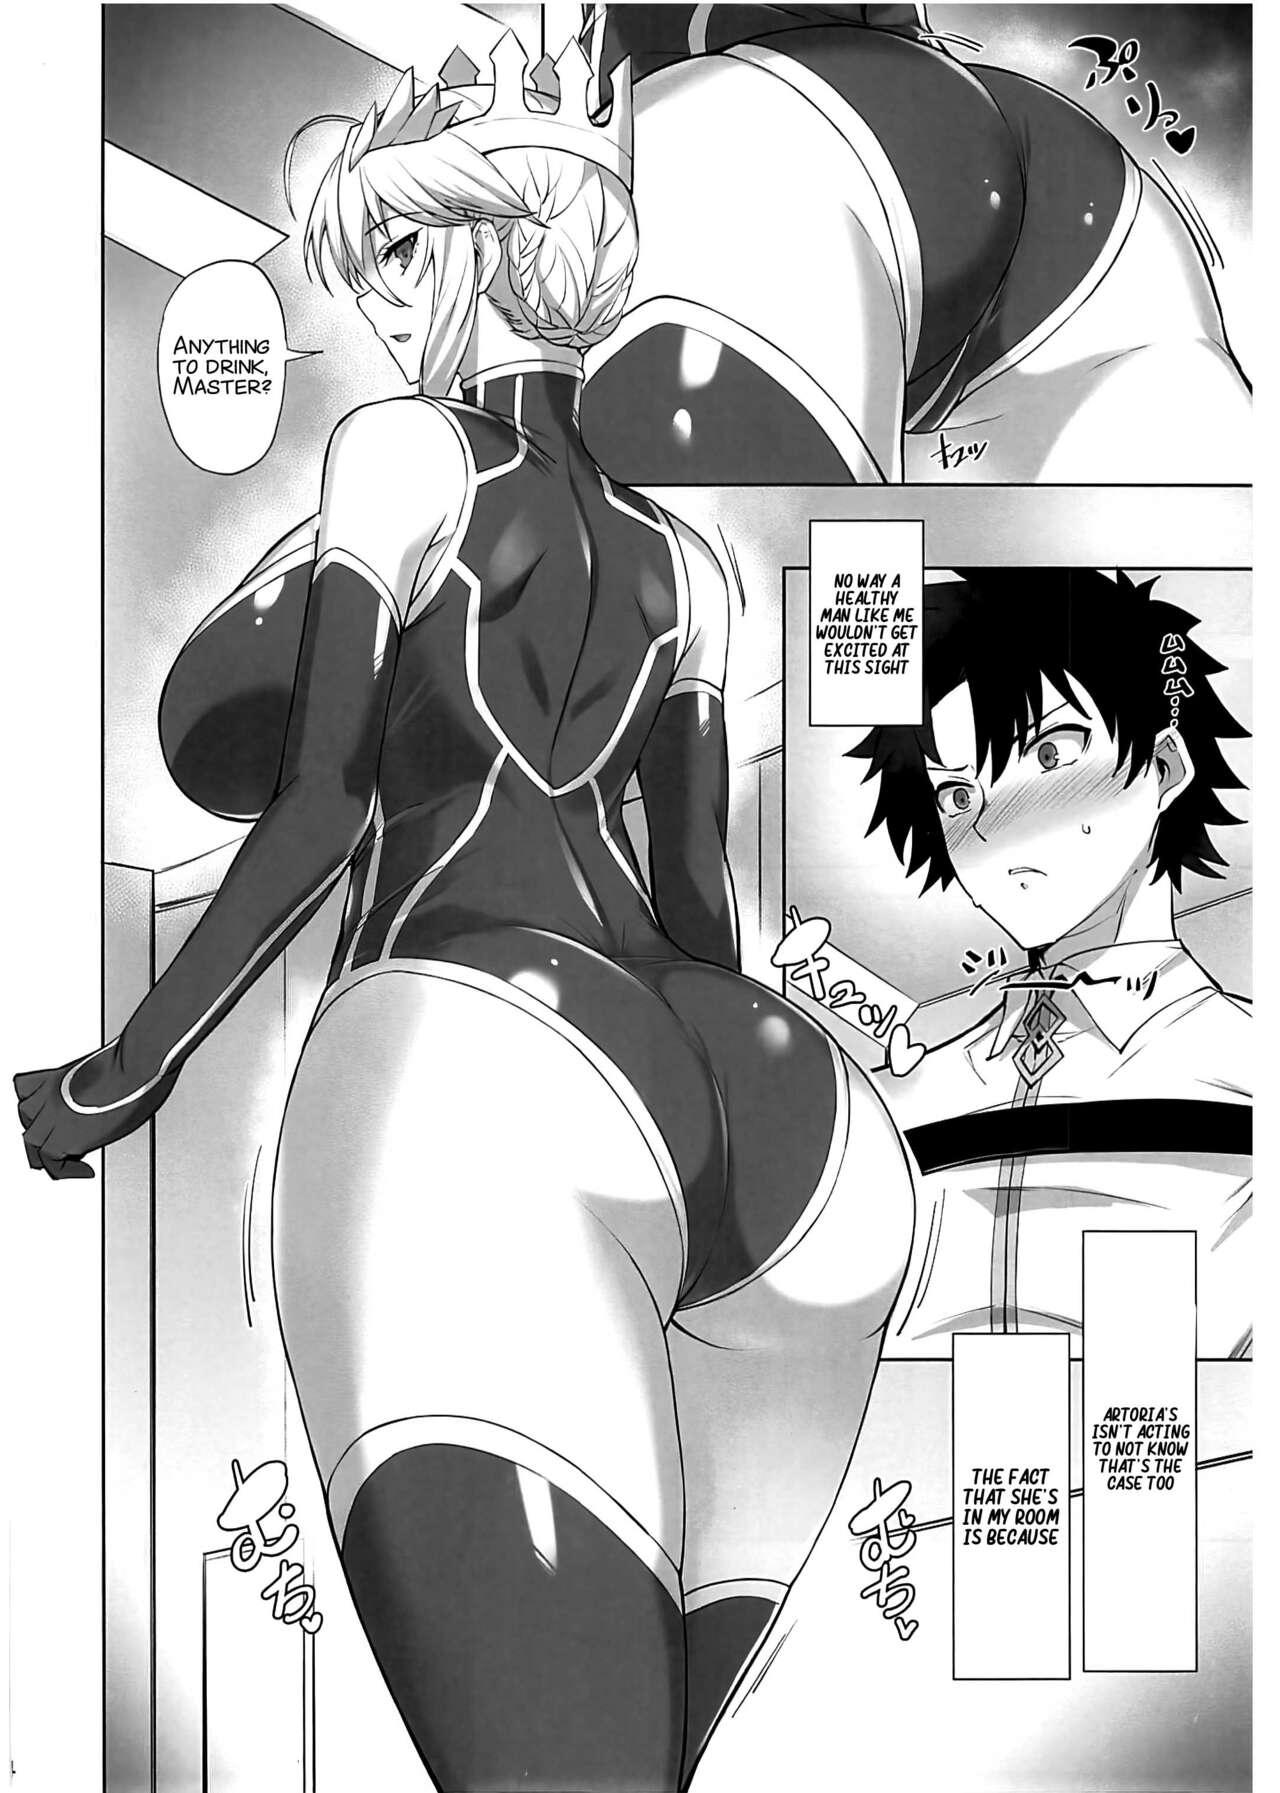 Old Young Chichiue Daisuki - my king my life - Fate grand order Femdom Pov - Page 5